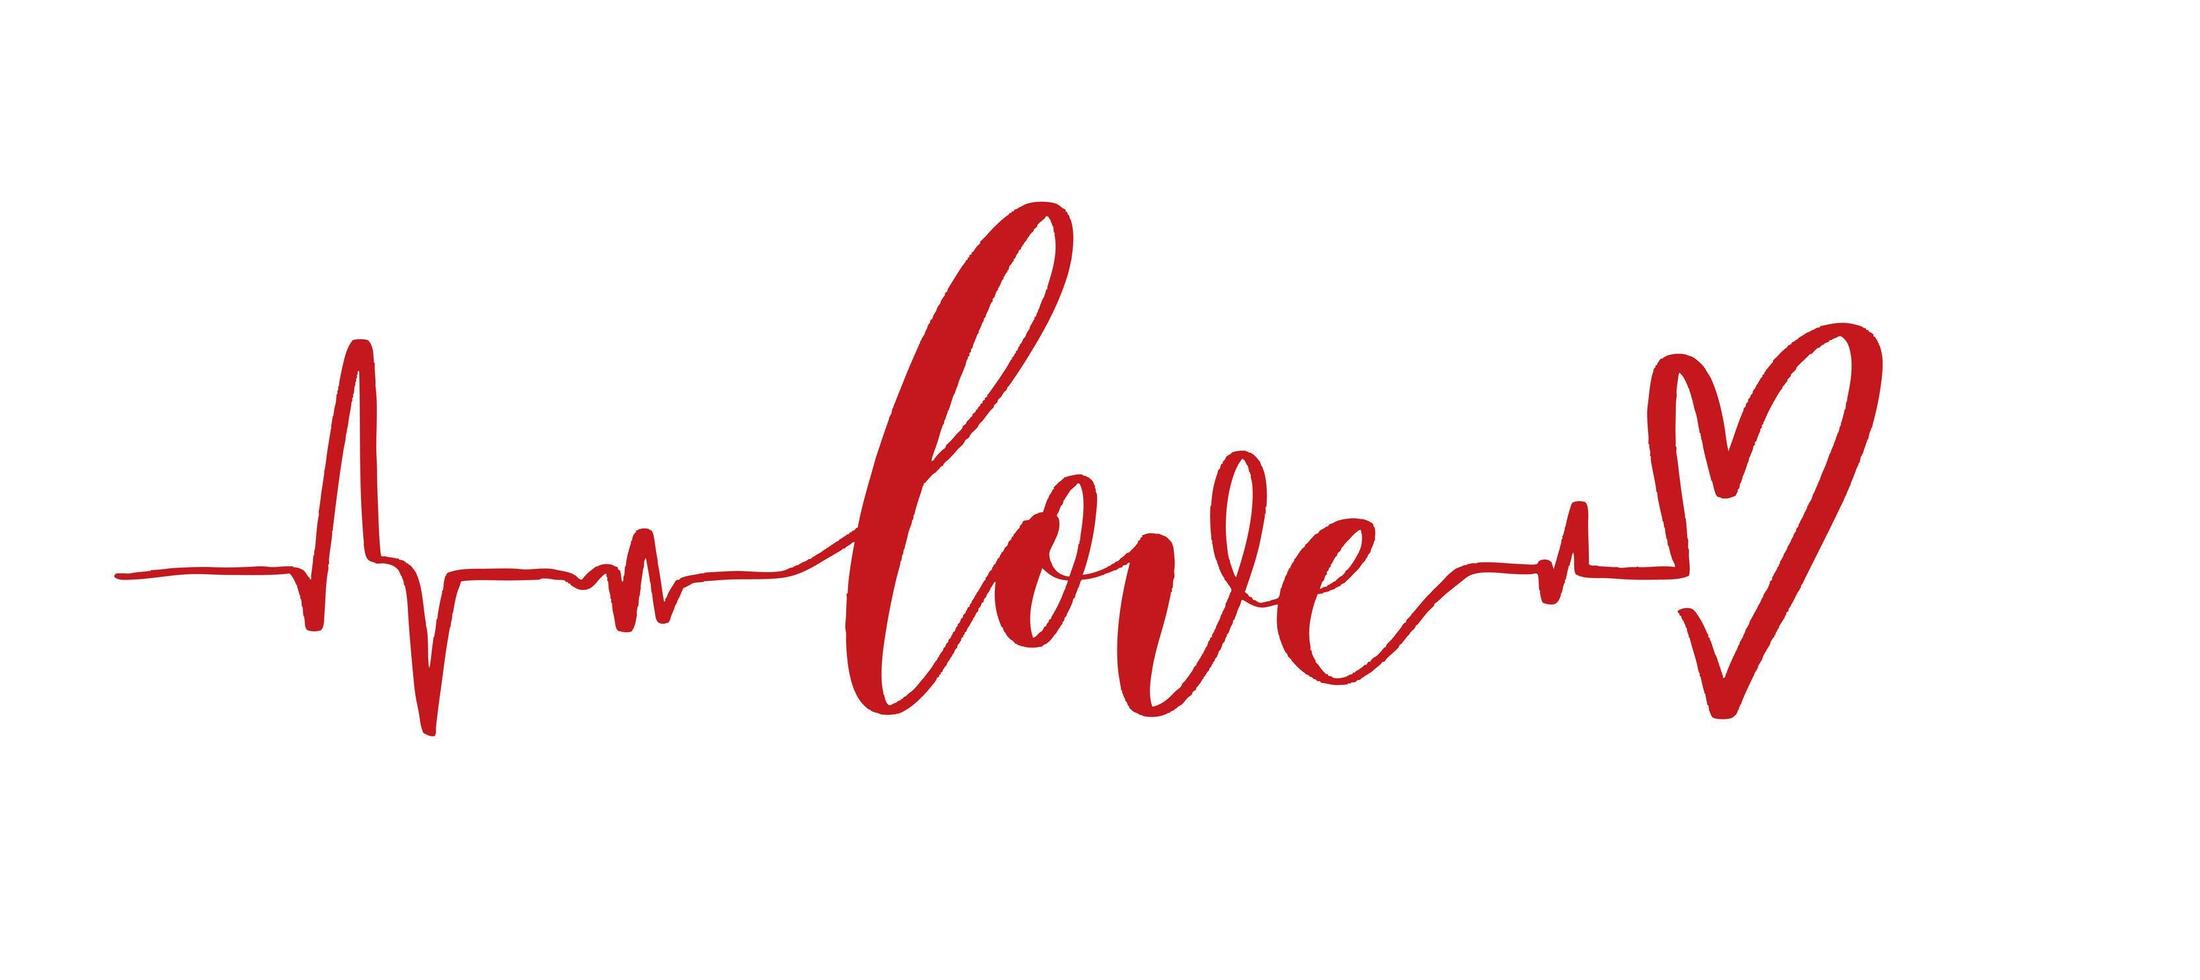 Love - calligraphic inscription with smooth lines. vector